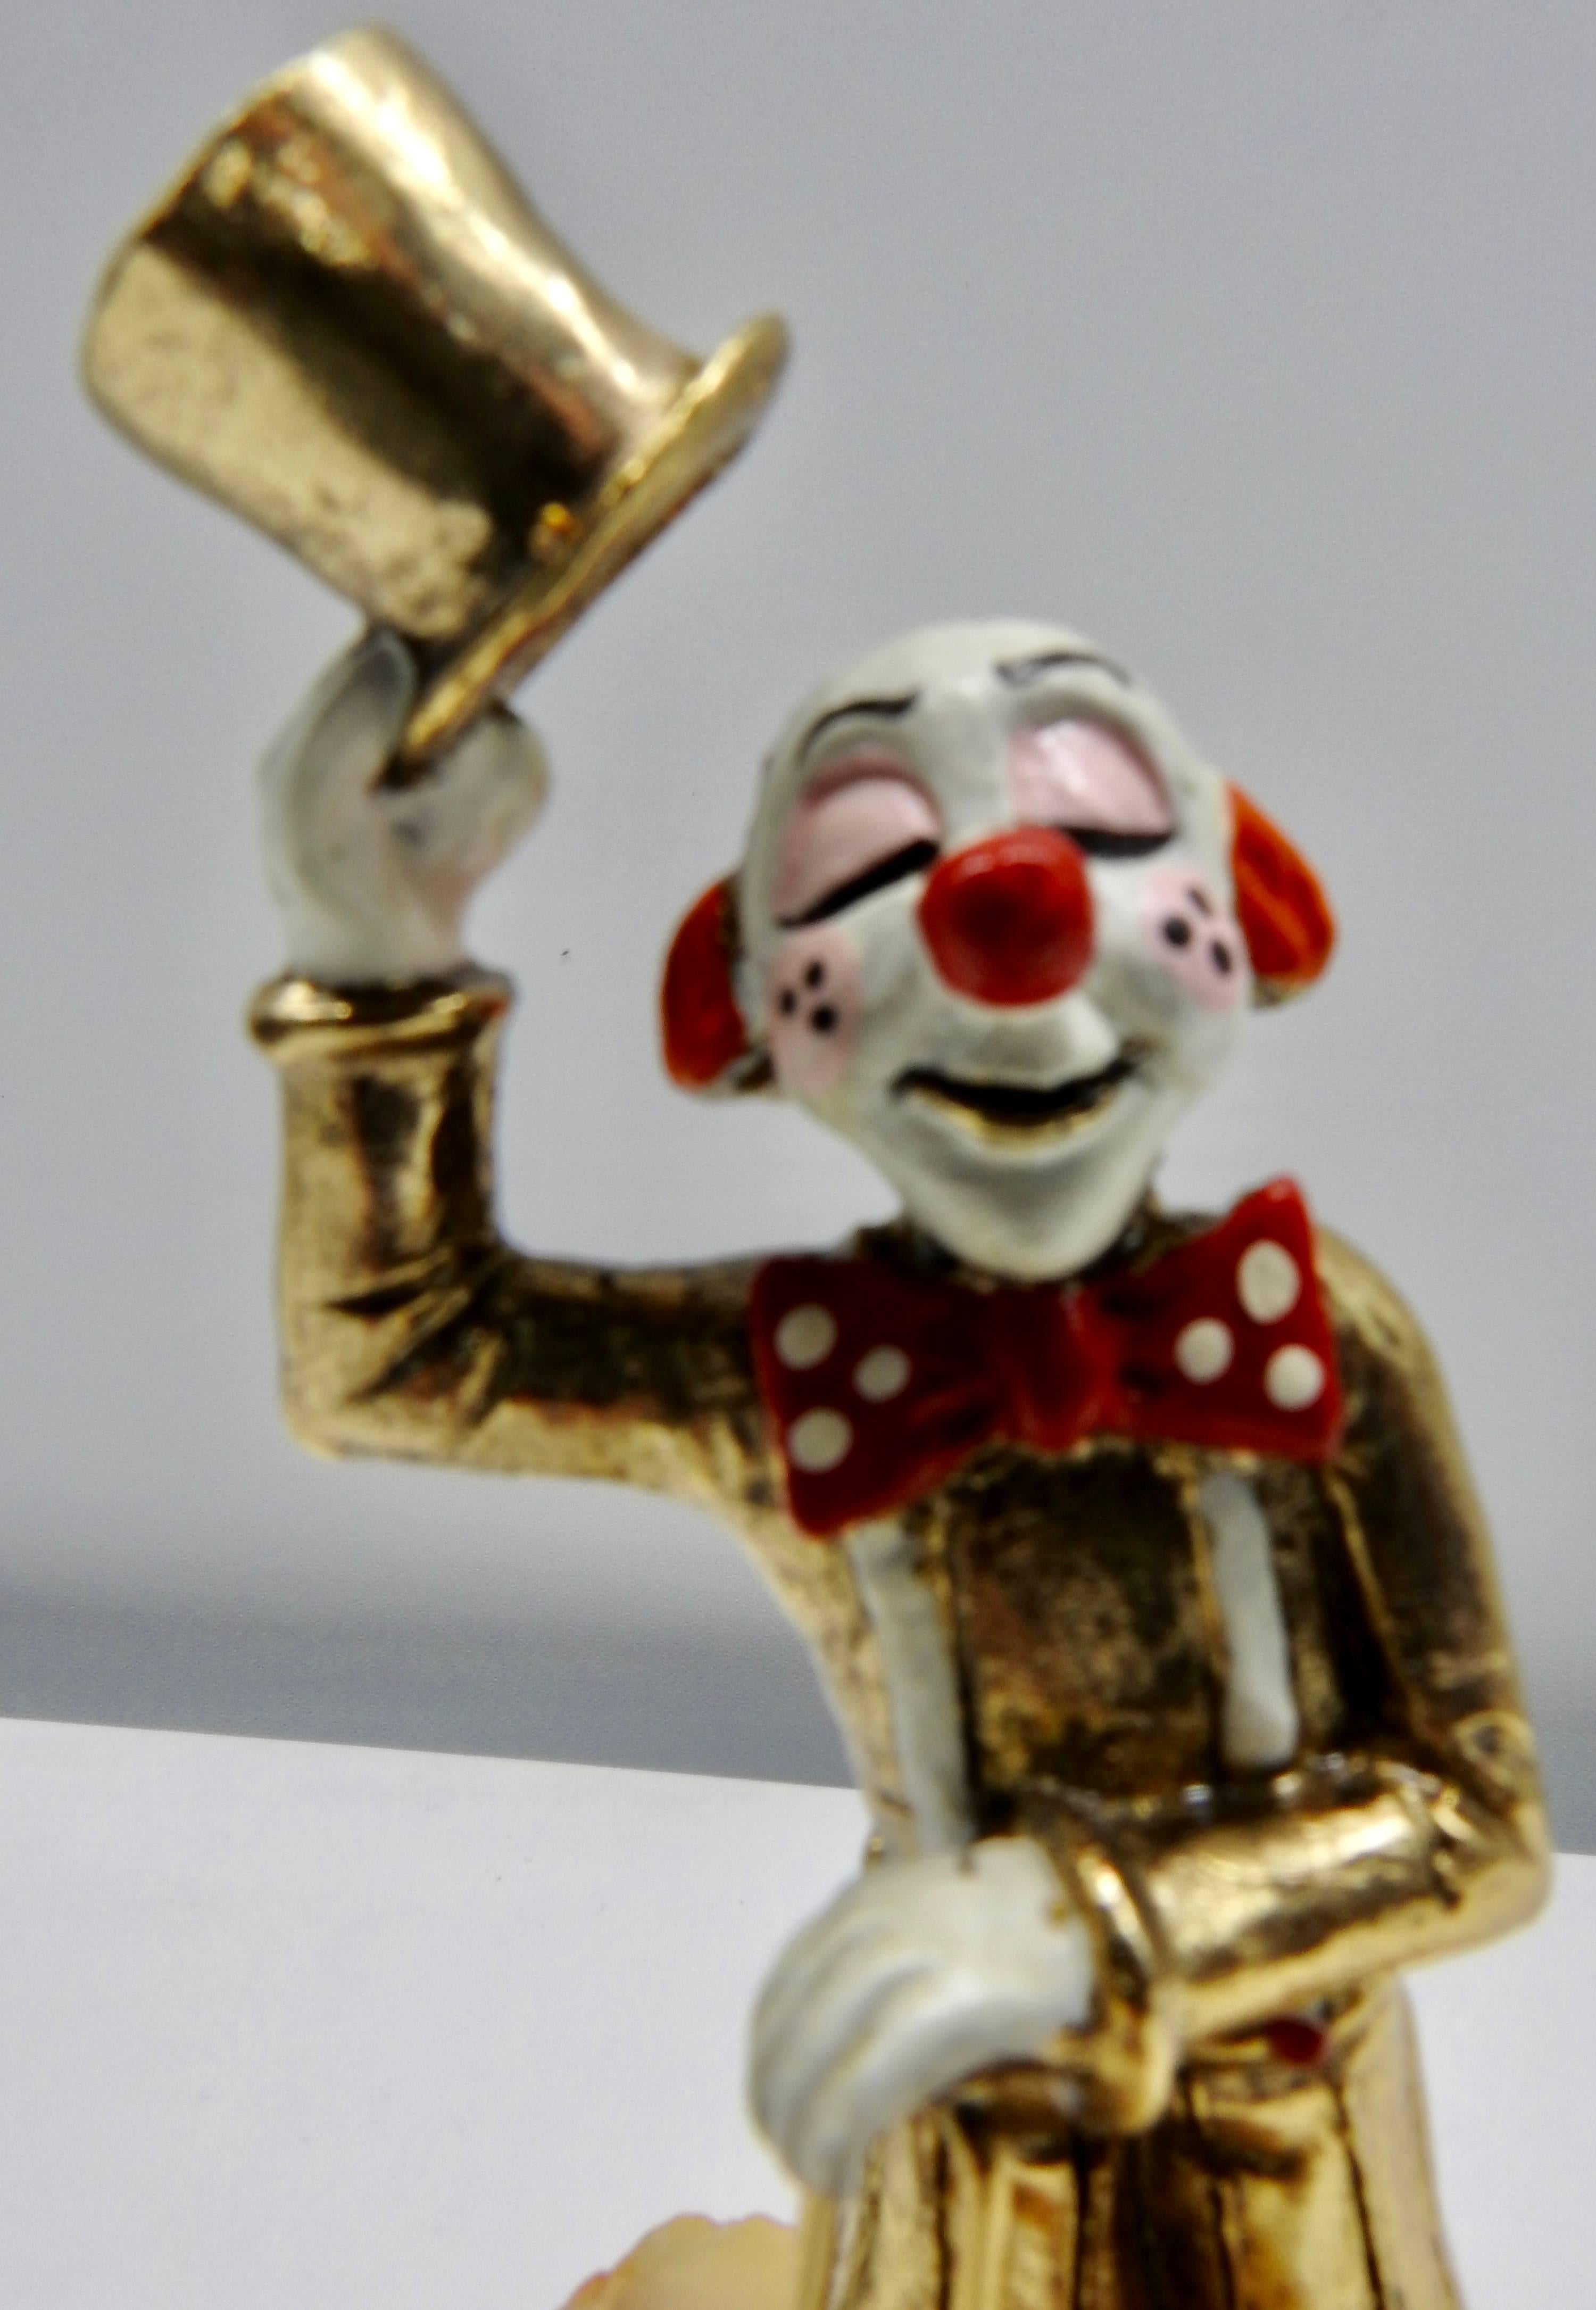 Folk Art Clown Sculpture with Cane and Top Hat by Ron Lee, 1979 For Sale